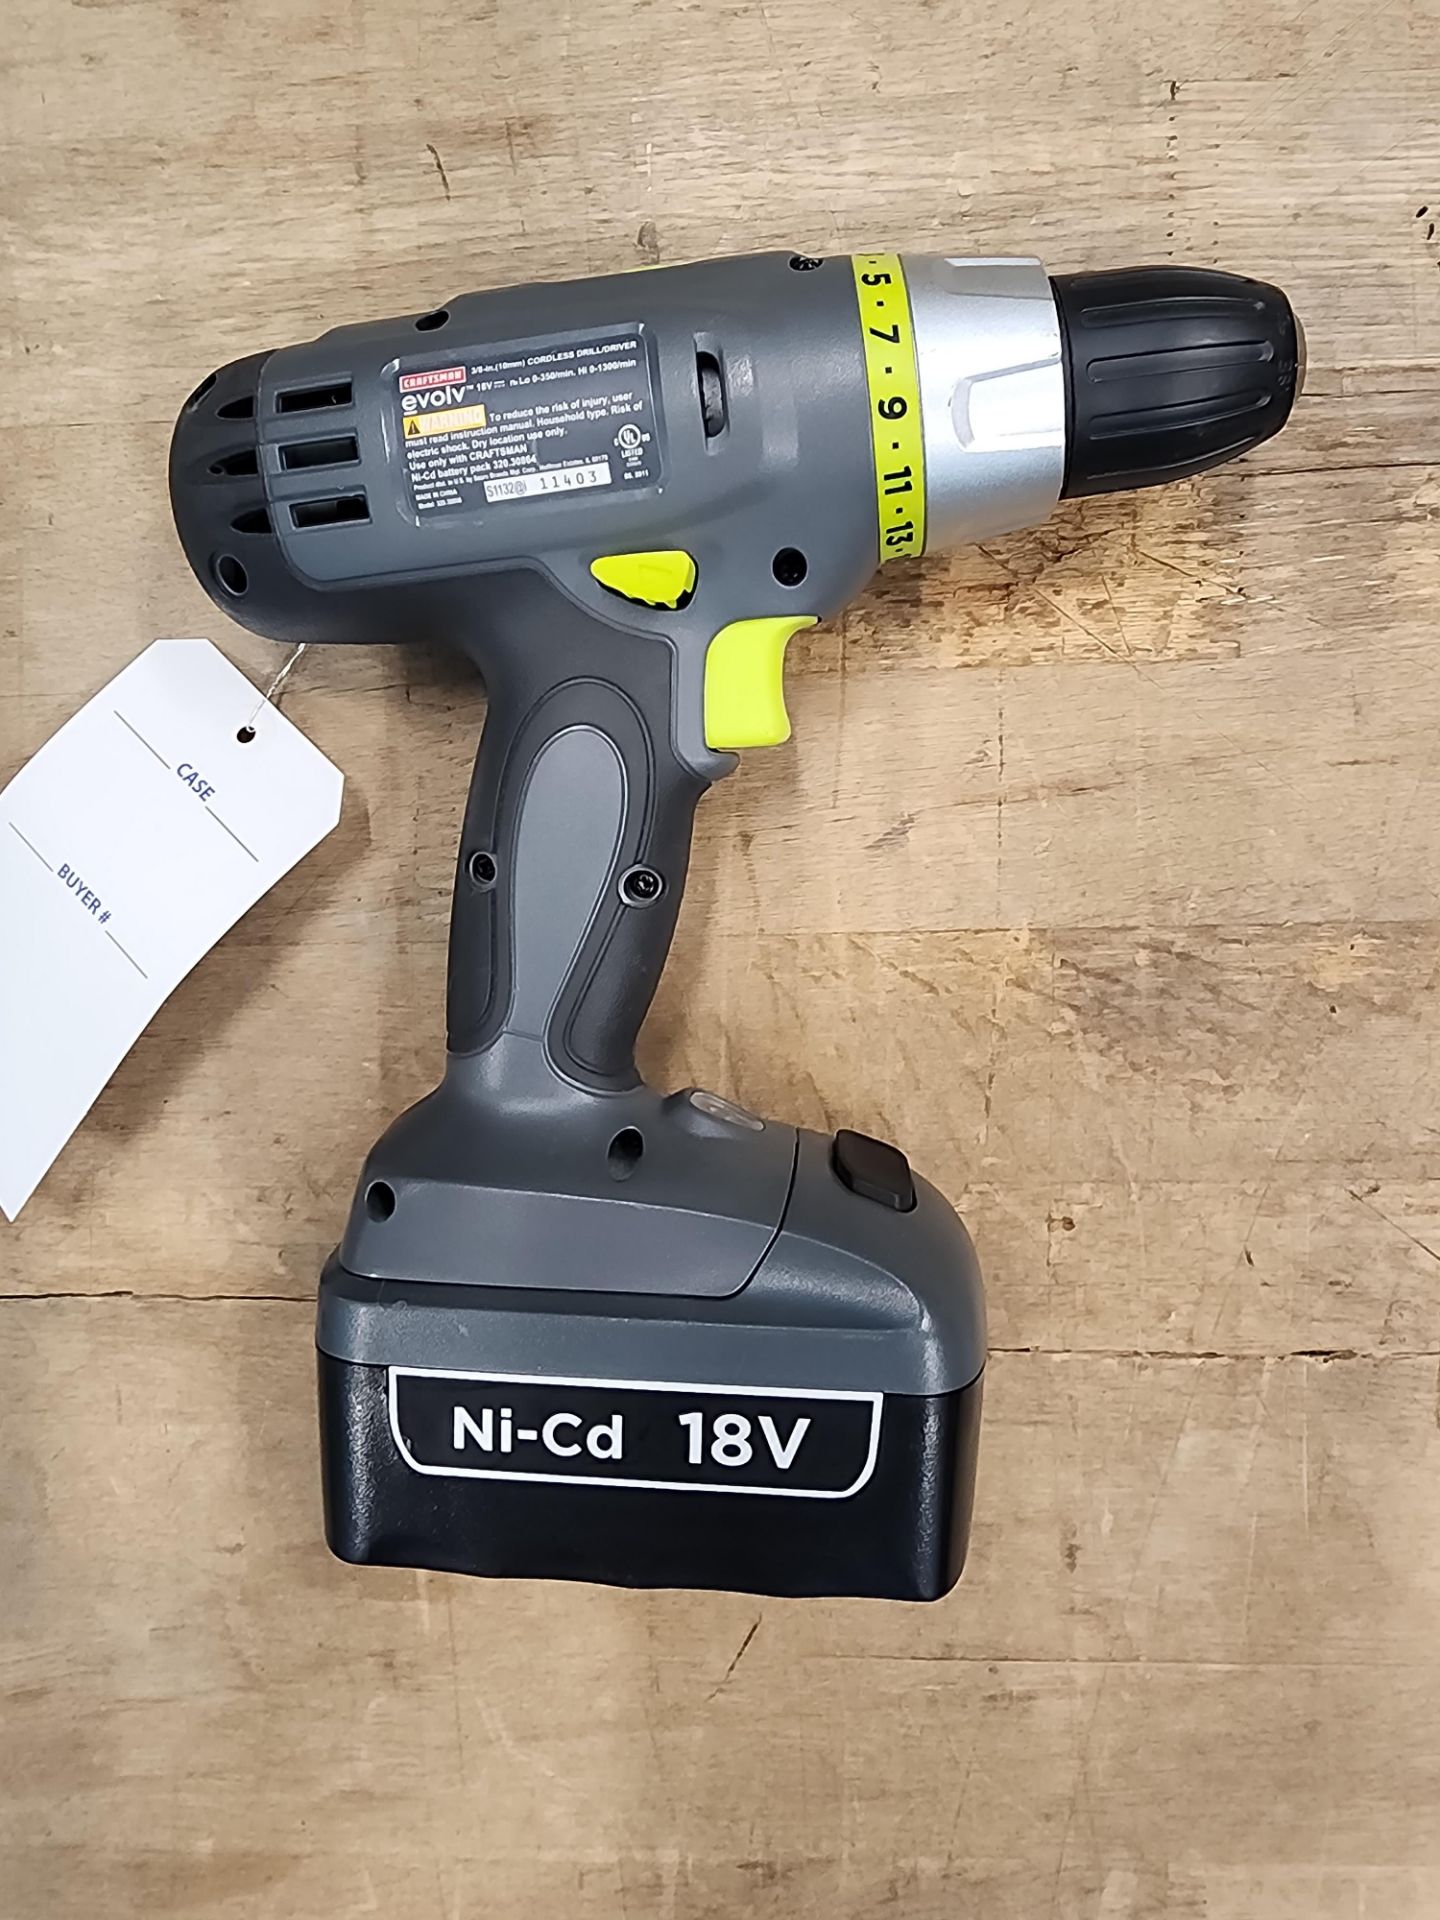 Craftsman evolv 18V 3/8" Cordless Drill/Driver w/Battery (No Battery Charger) - Image 3 of 4